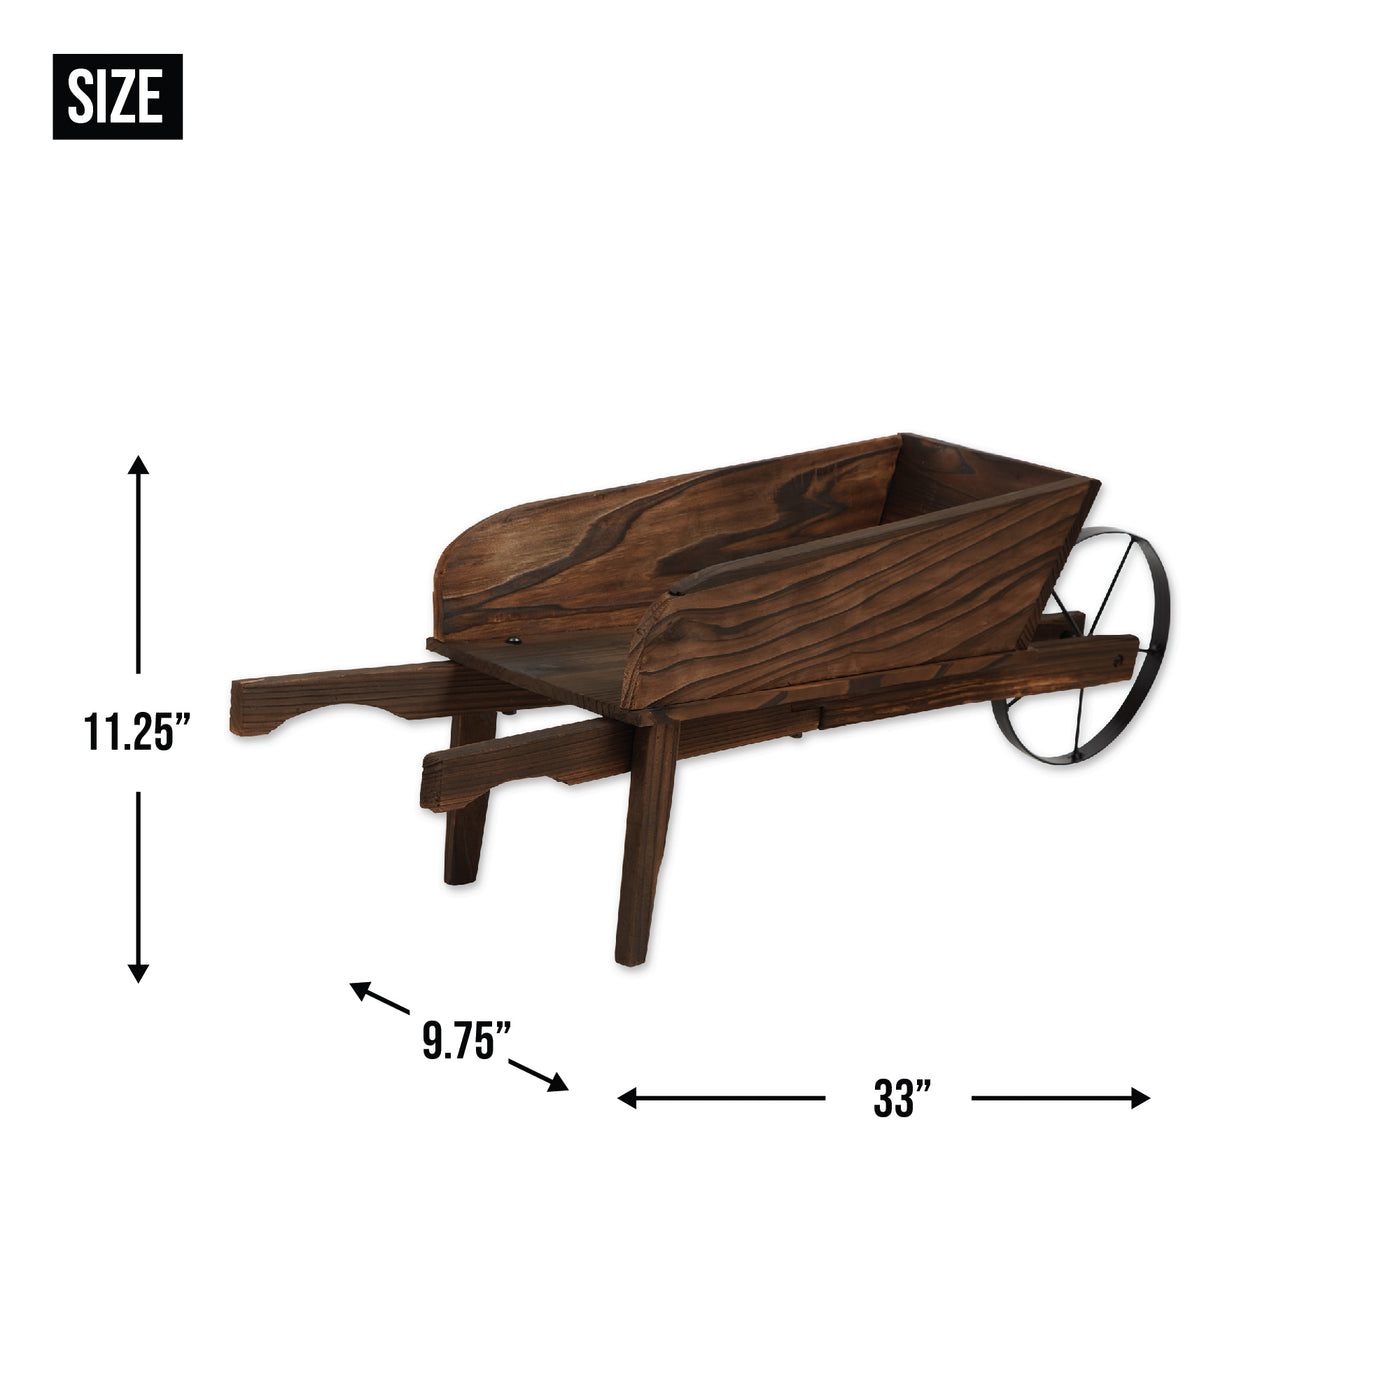 Wood Country Flower Cart Planter